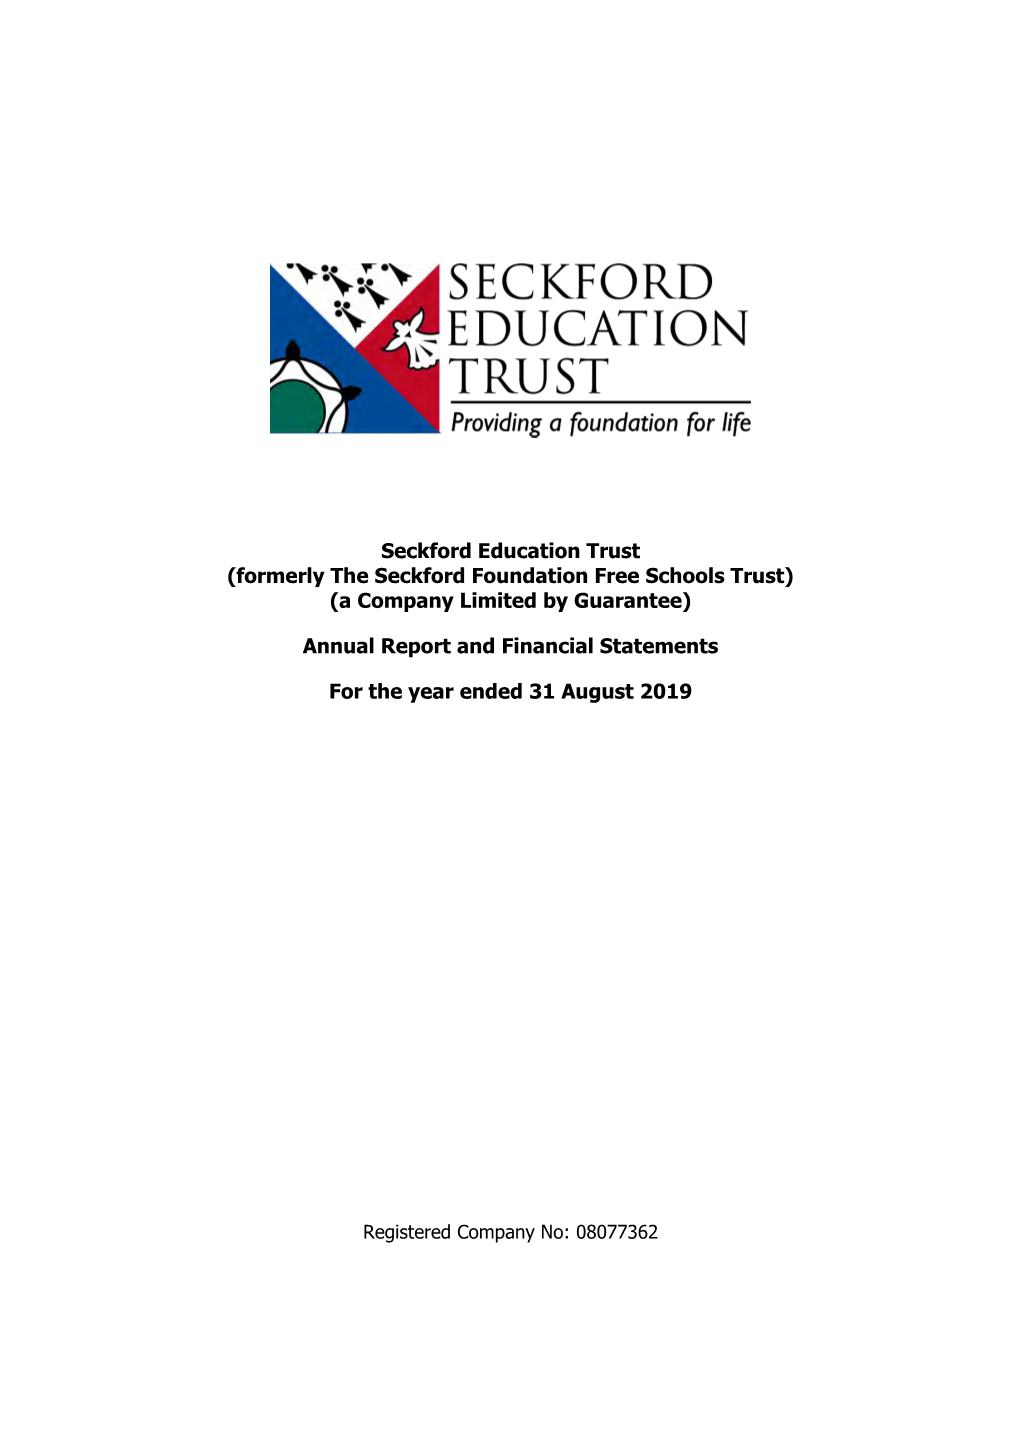 Seckford Education Trust (Formerly the Seckford Foundation Free Schools Trust) (A Company Limited by Guarantee)